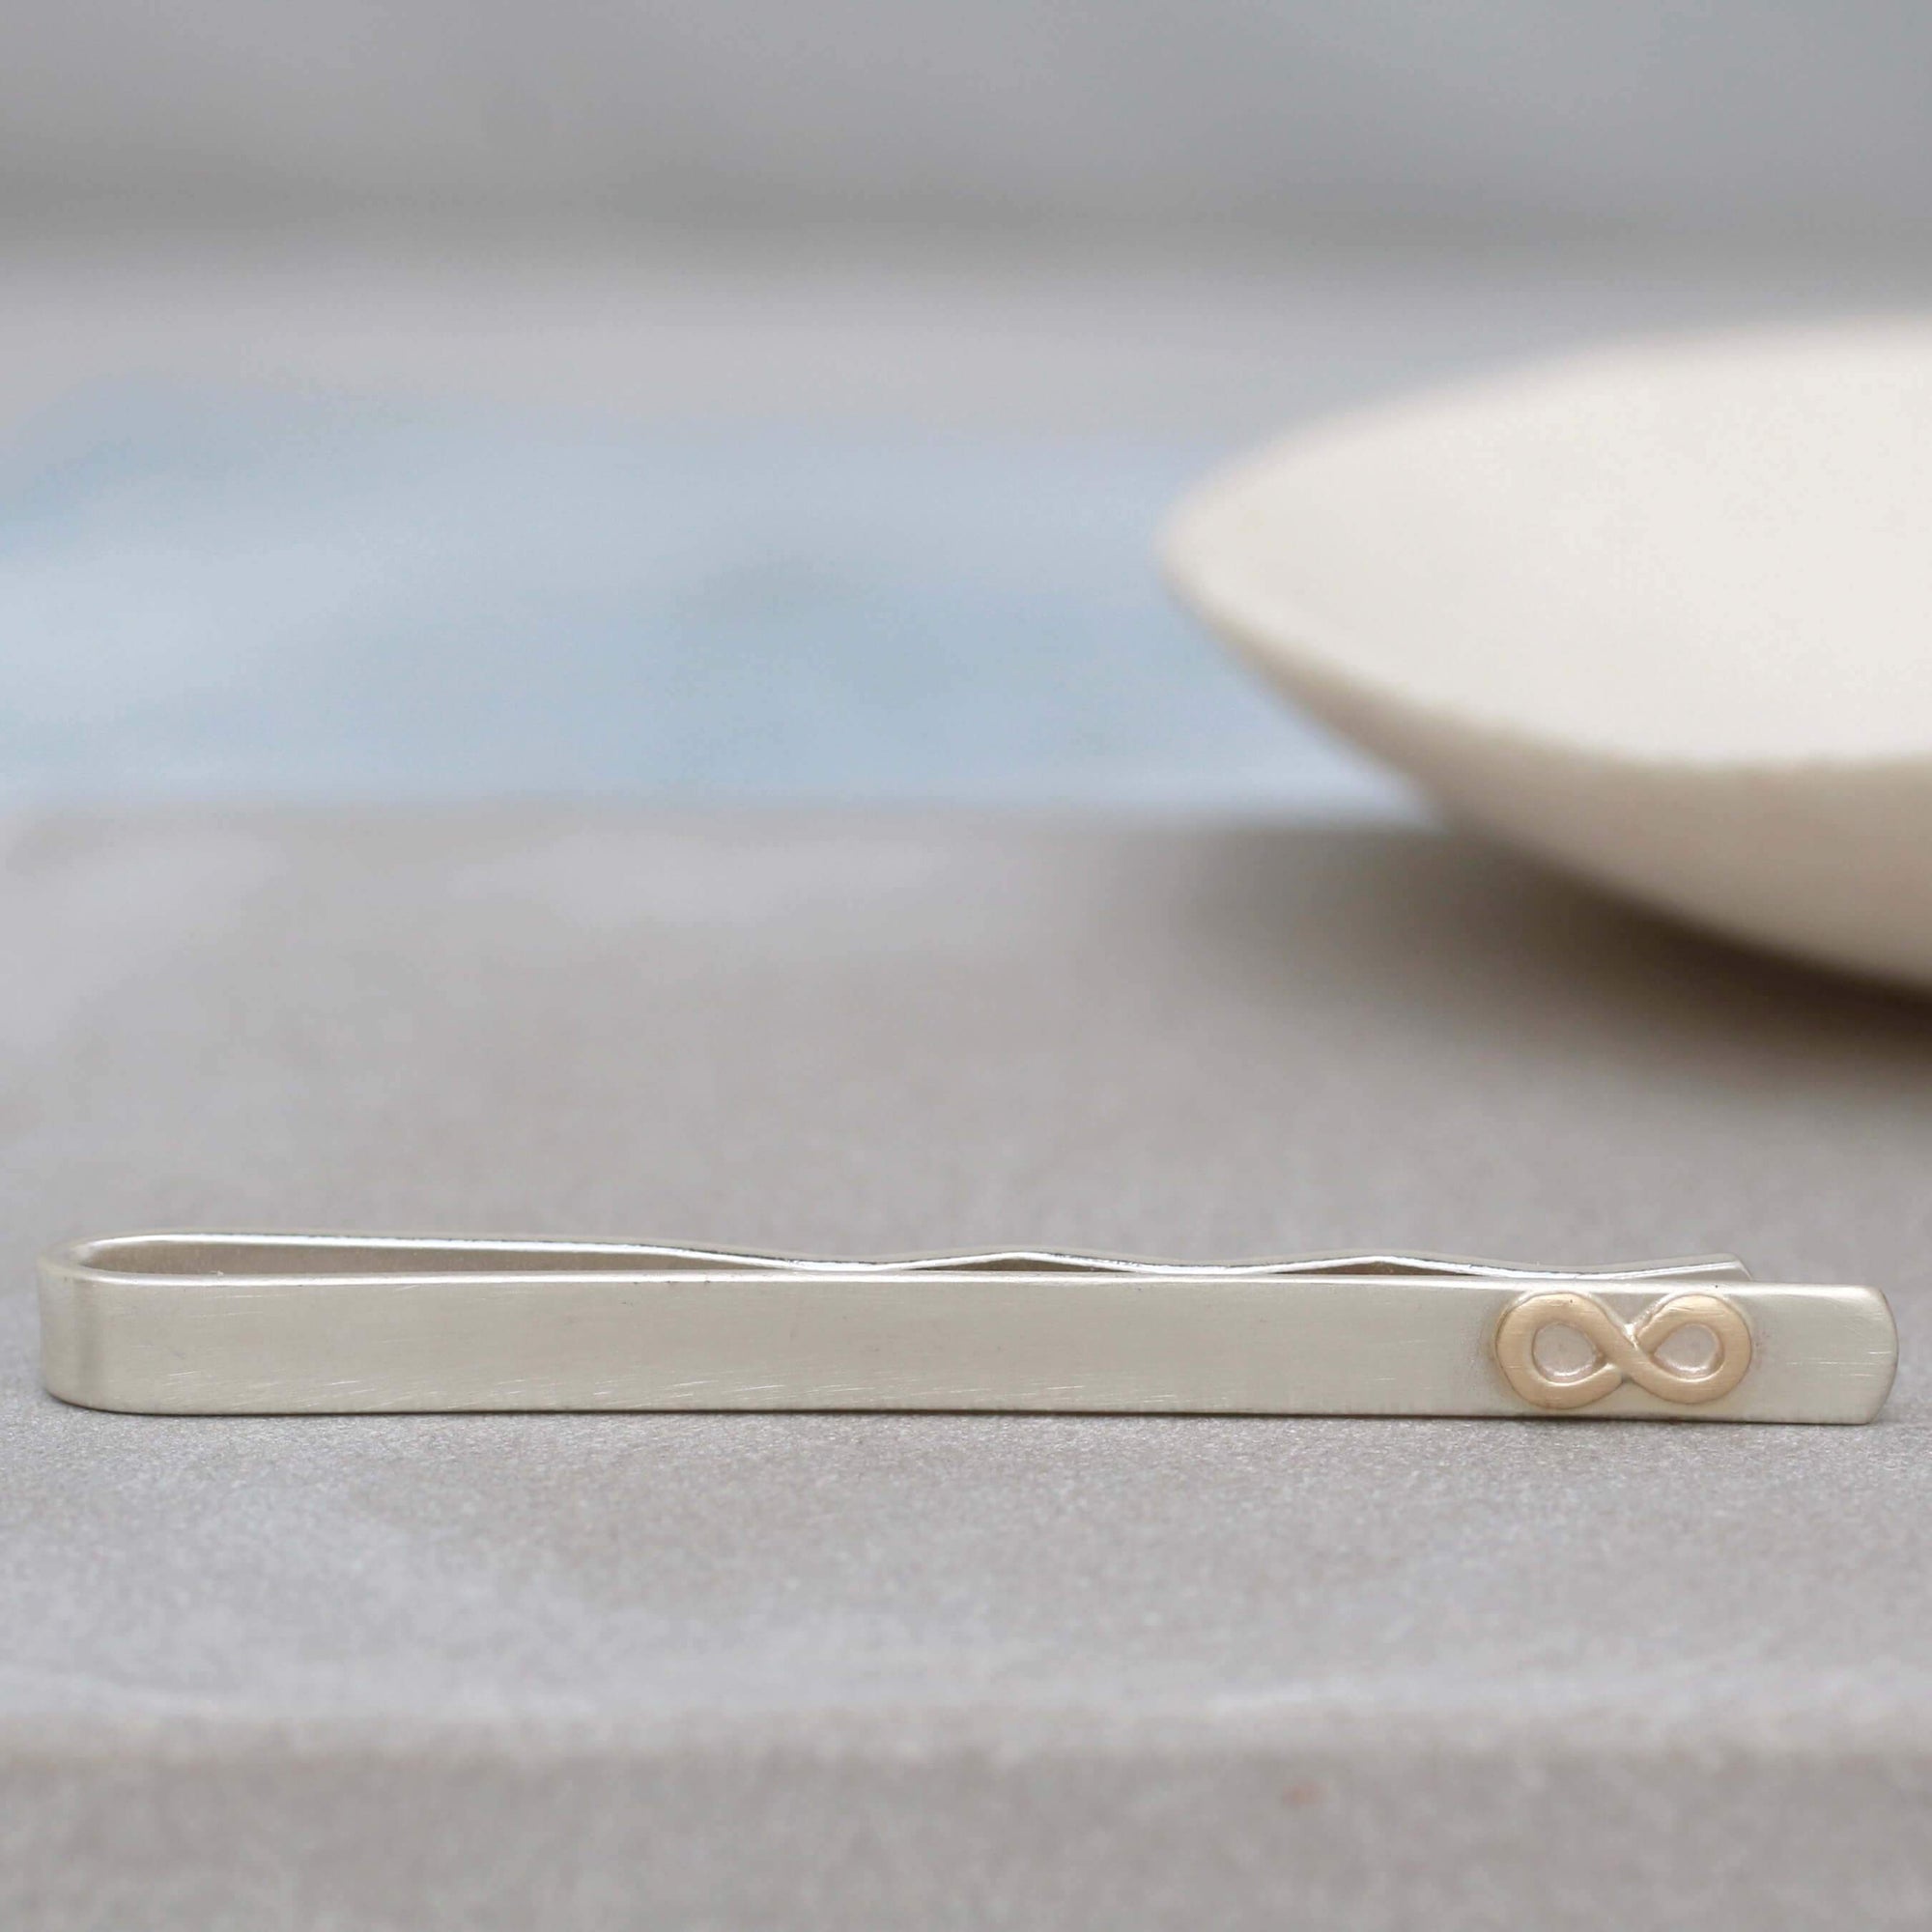 silver and gold tie clip